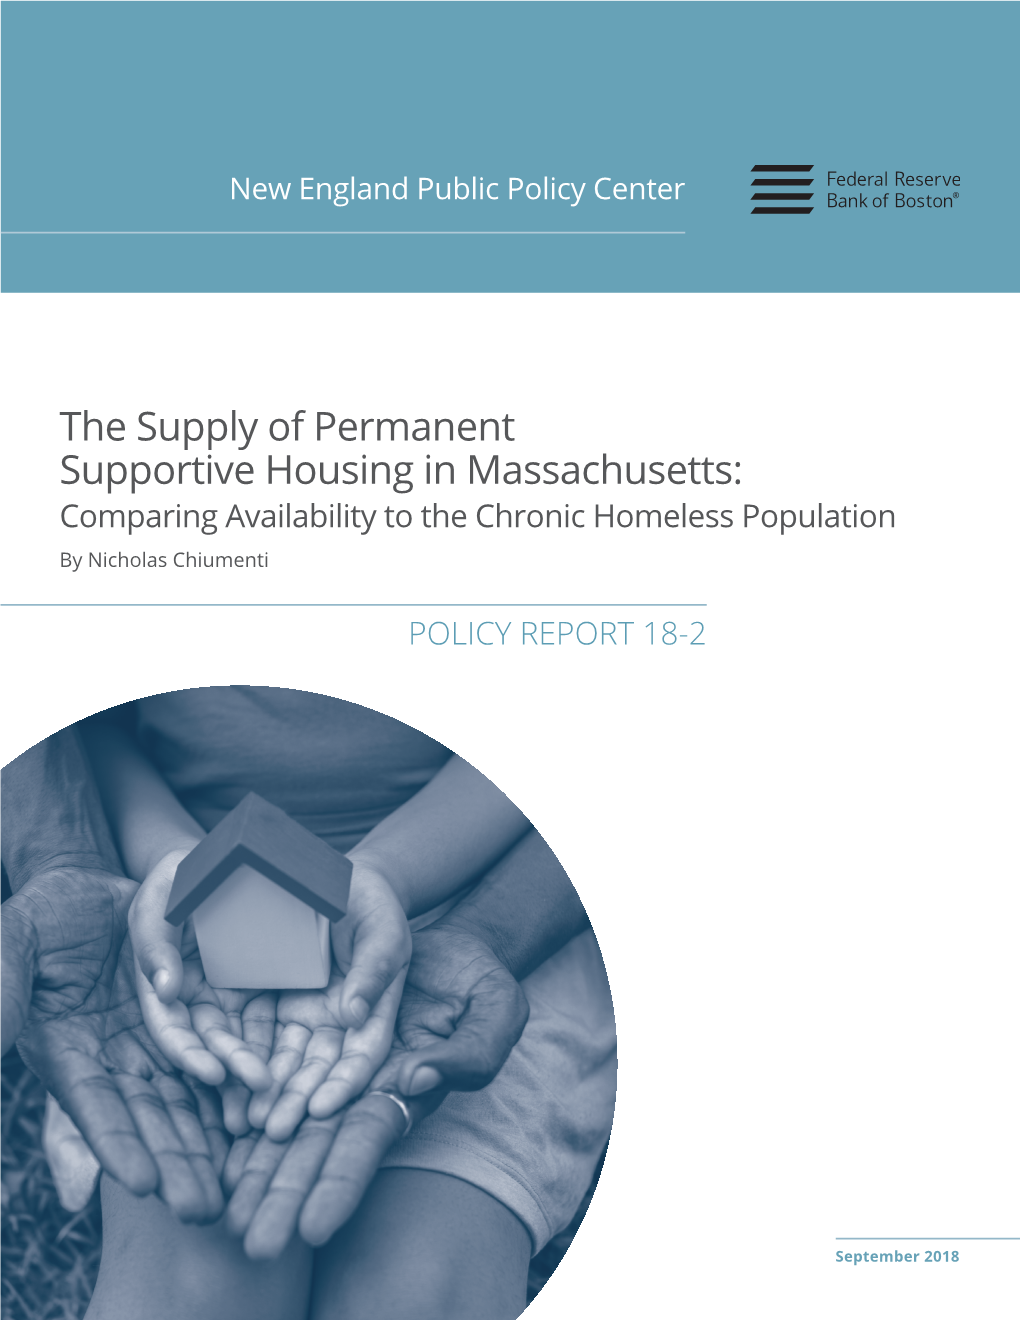 The Supply of Permanent Supportive Housing in Massachusetts: Comparing Availability to the Chronic Homeless Population by Nicholas Chiumenti